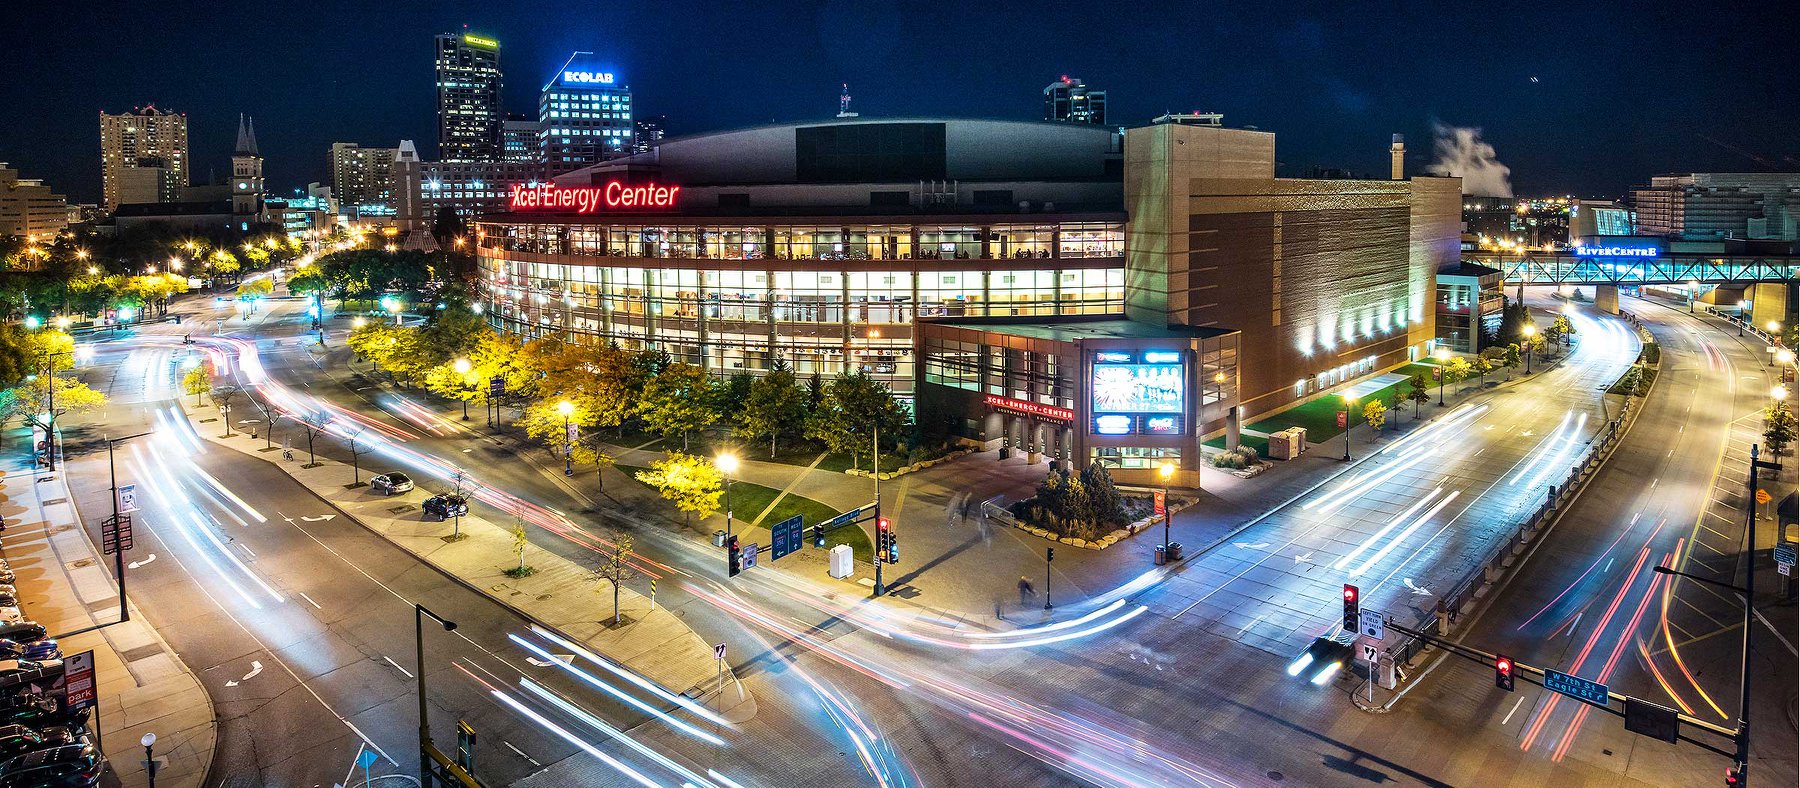 The exterior of the Xcel Energy Center at night